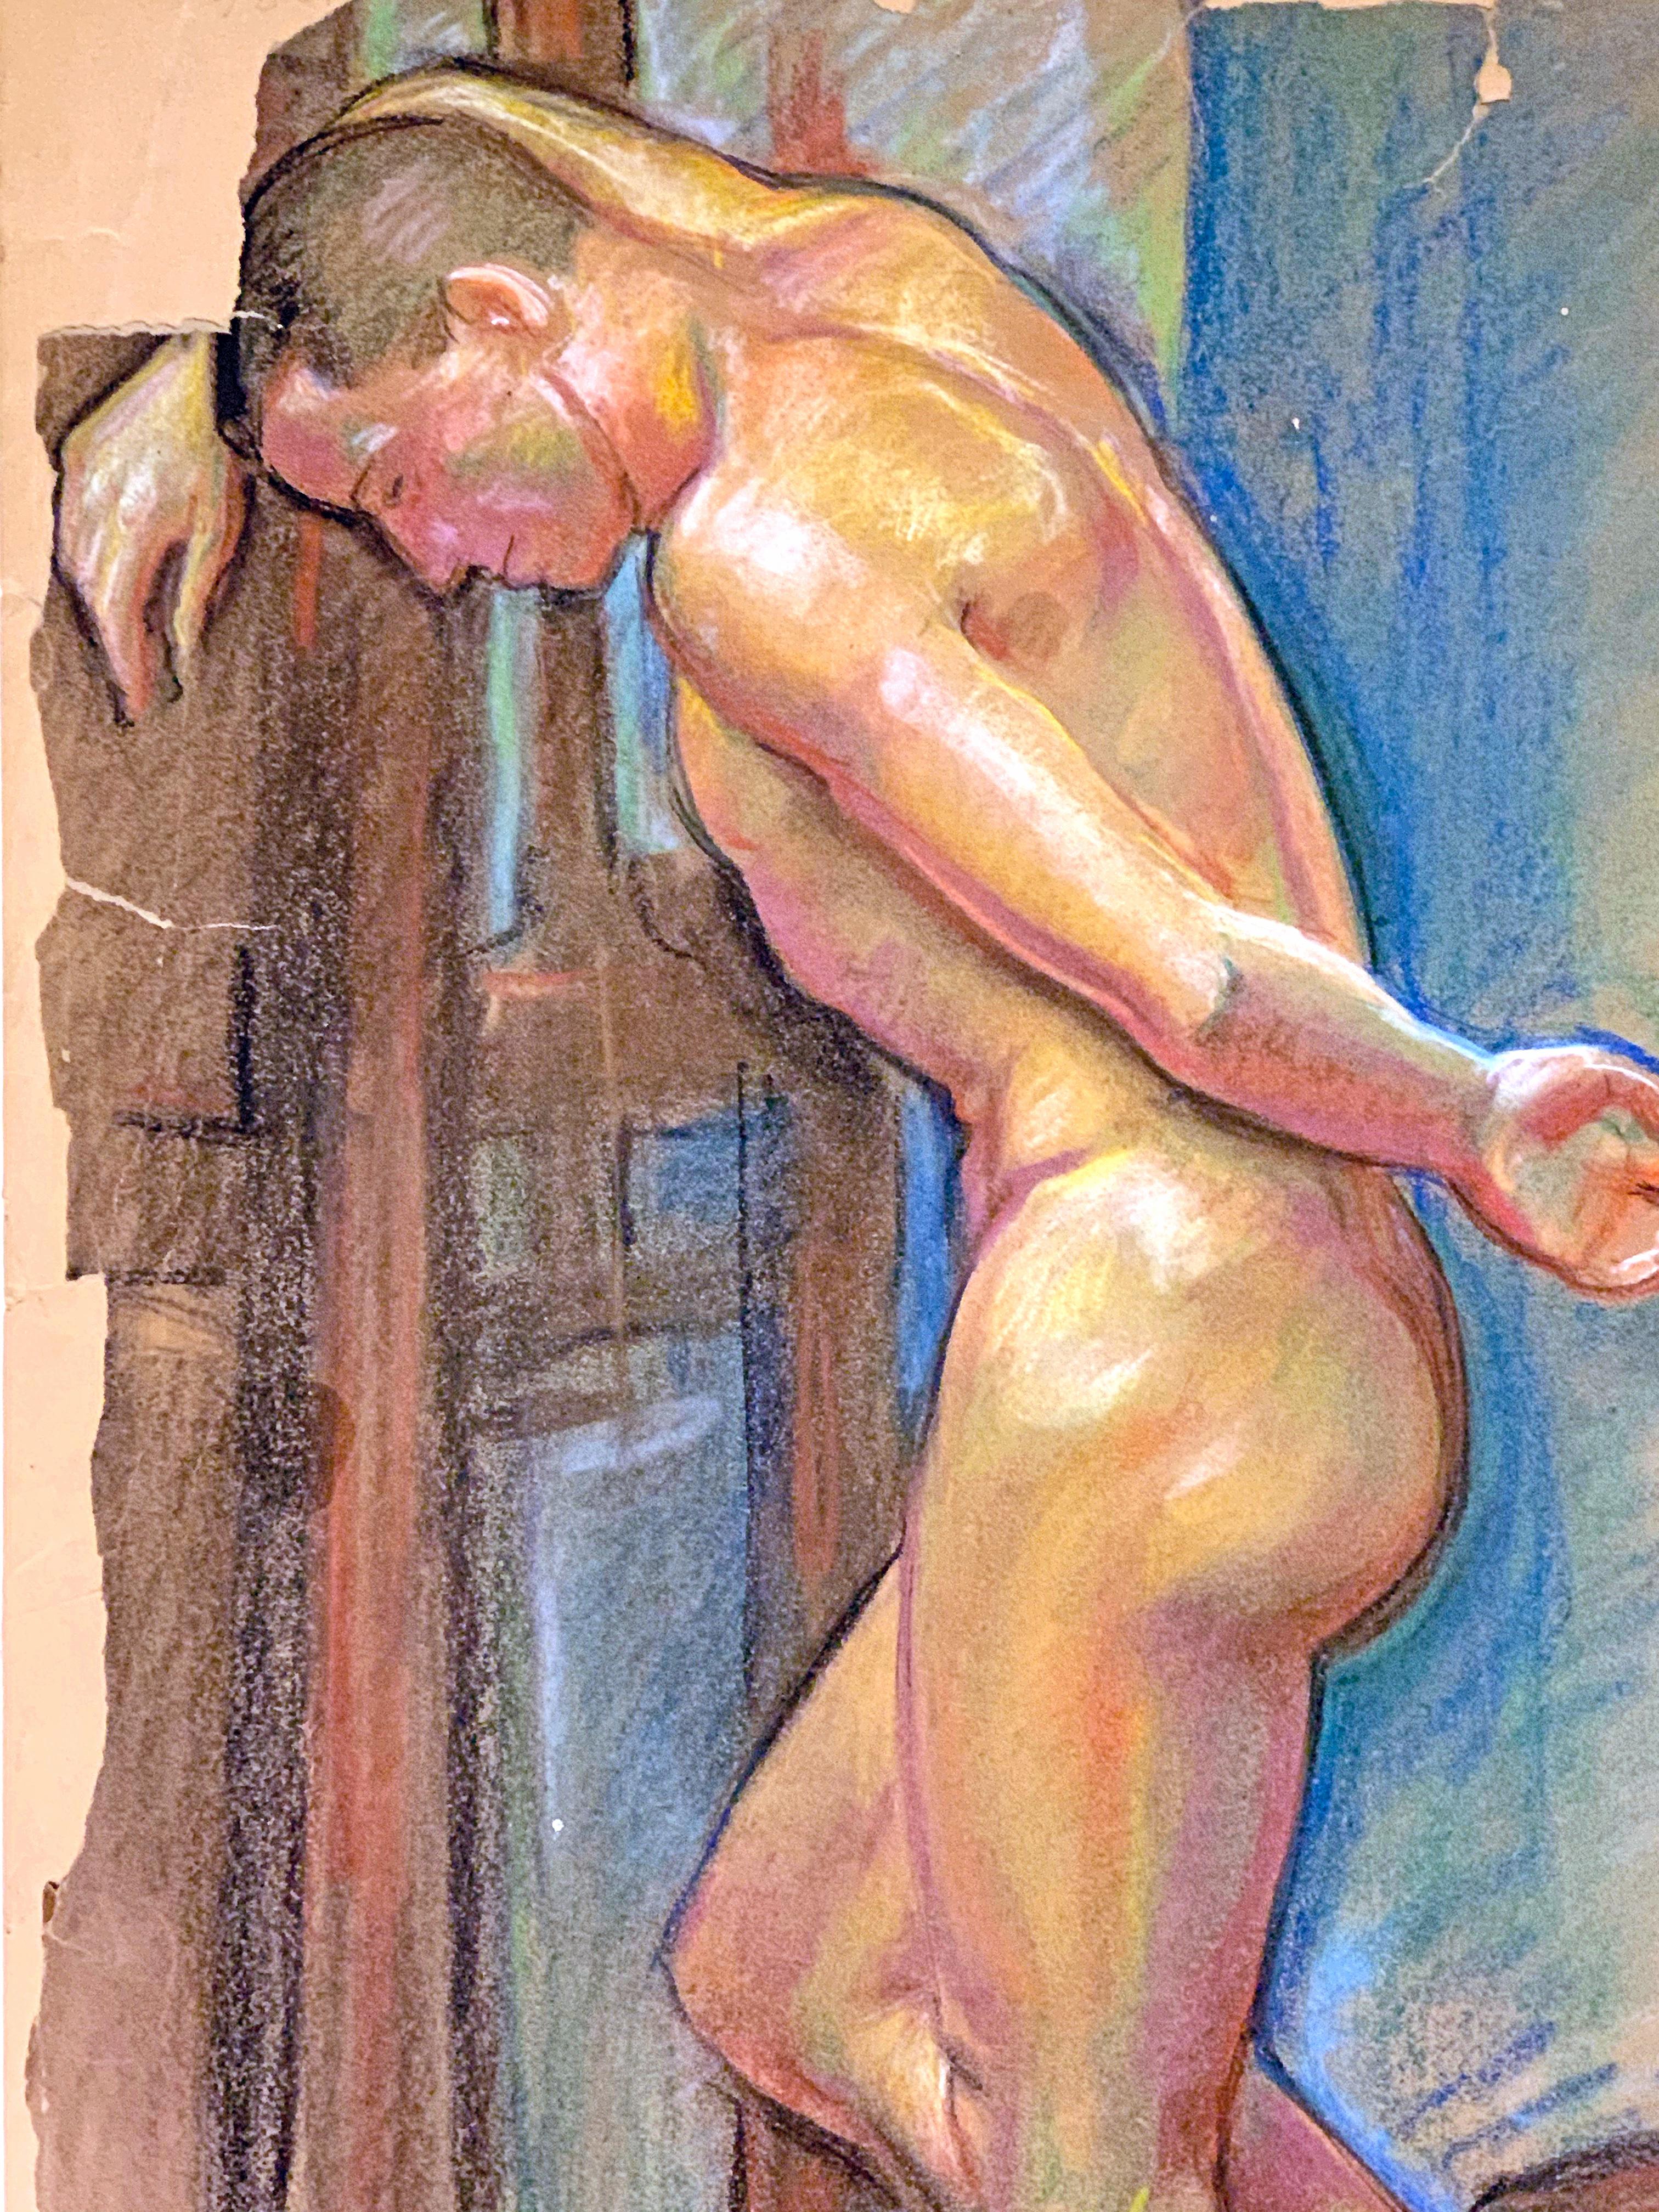 Sensuous and vividly-hued, this pastel drawing of a standing male nude with his head resting against the wall was made by Allyn Cox, son of the famous muralist Kenyon Cox. The younger Allyn was important in his own right for executing an ambitious